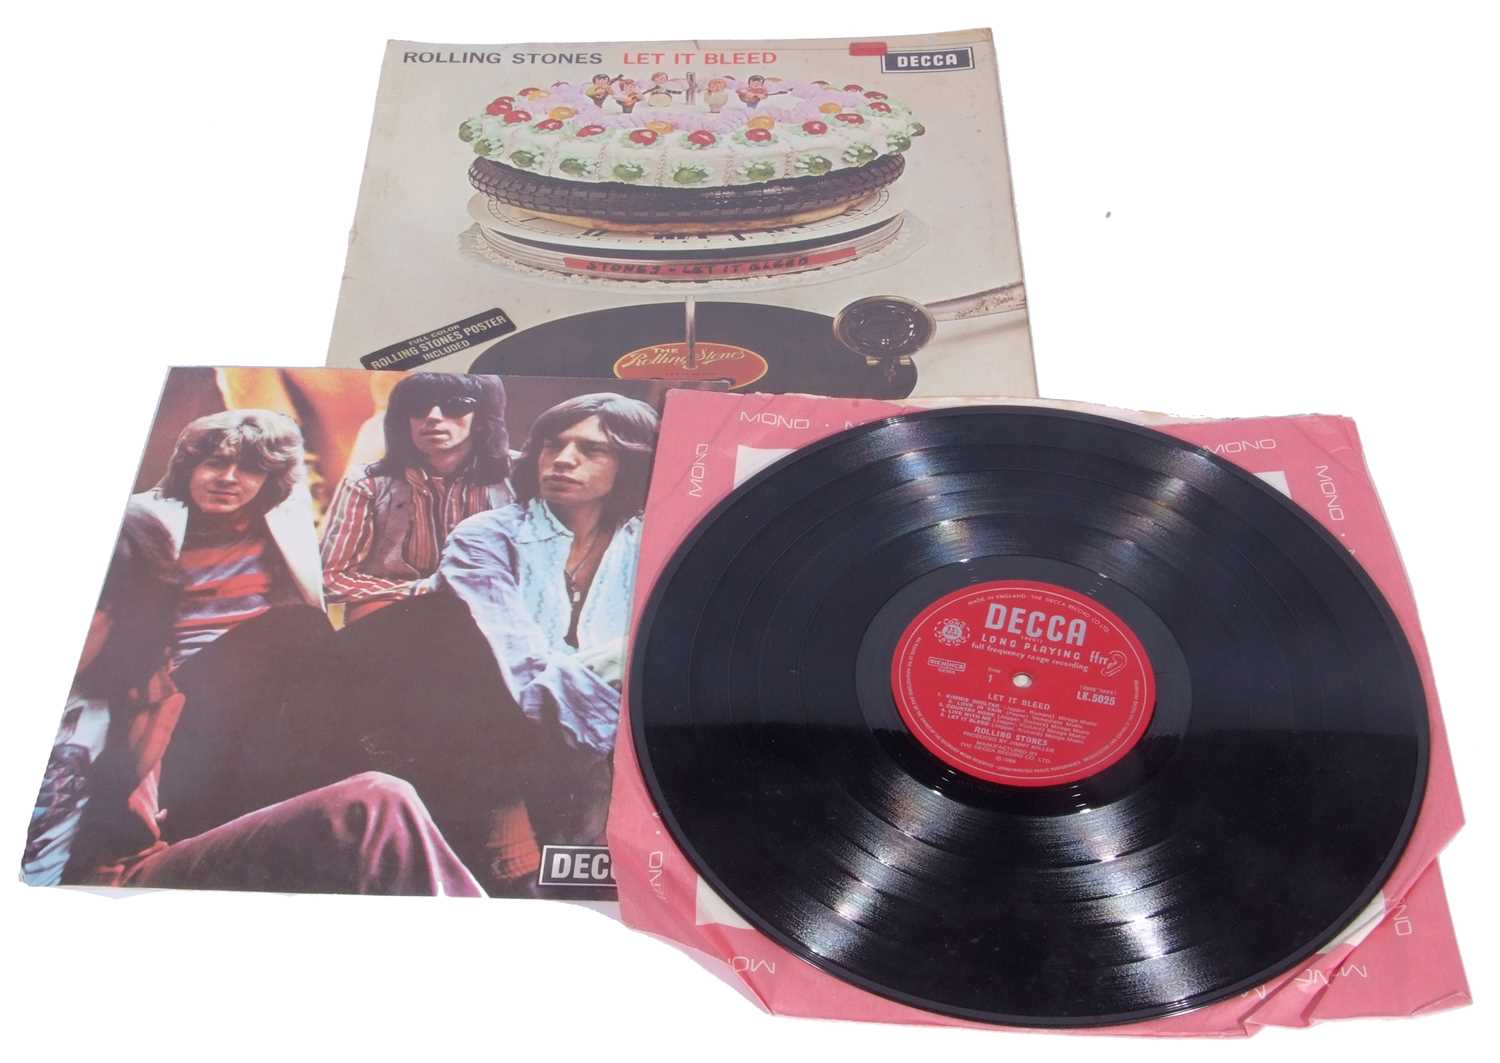 THE ROLLING STONES Let It Bleed Vinyl LP. First 'red-mono' pressing complete with poster. - Image 13 of 19